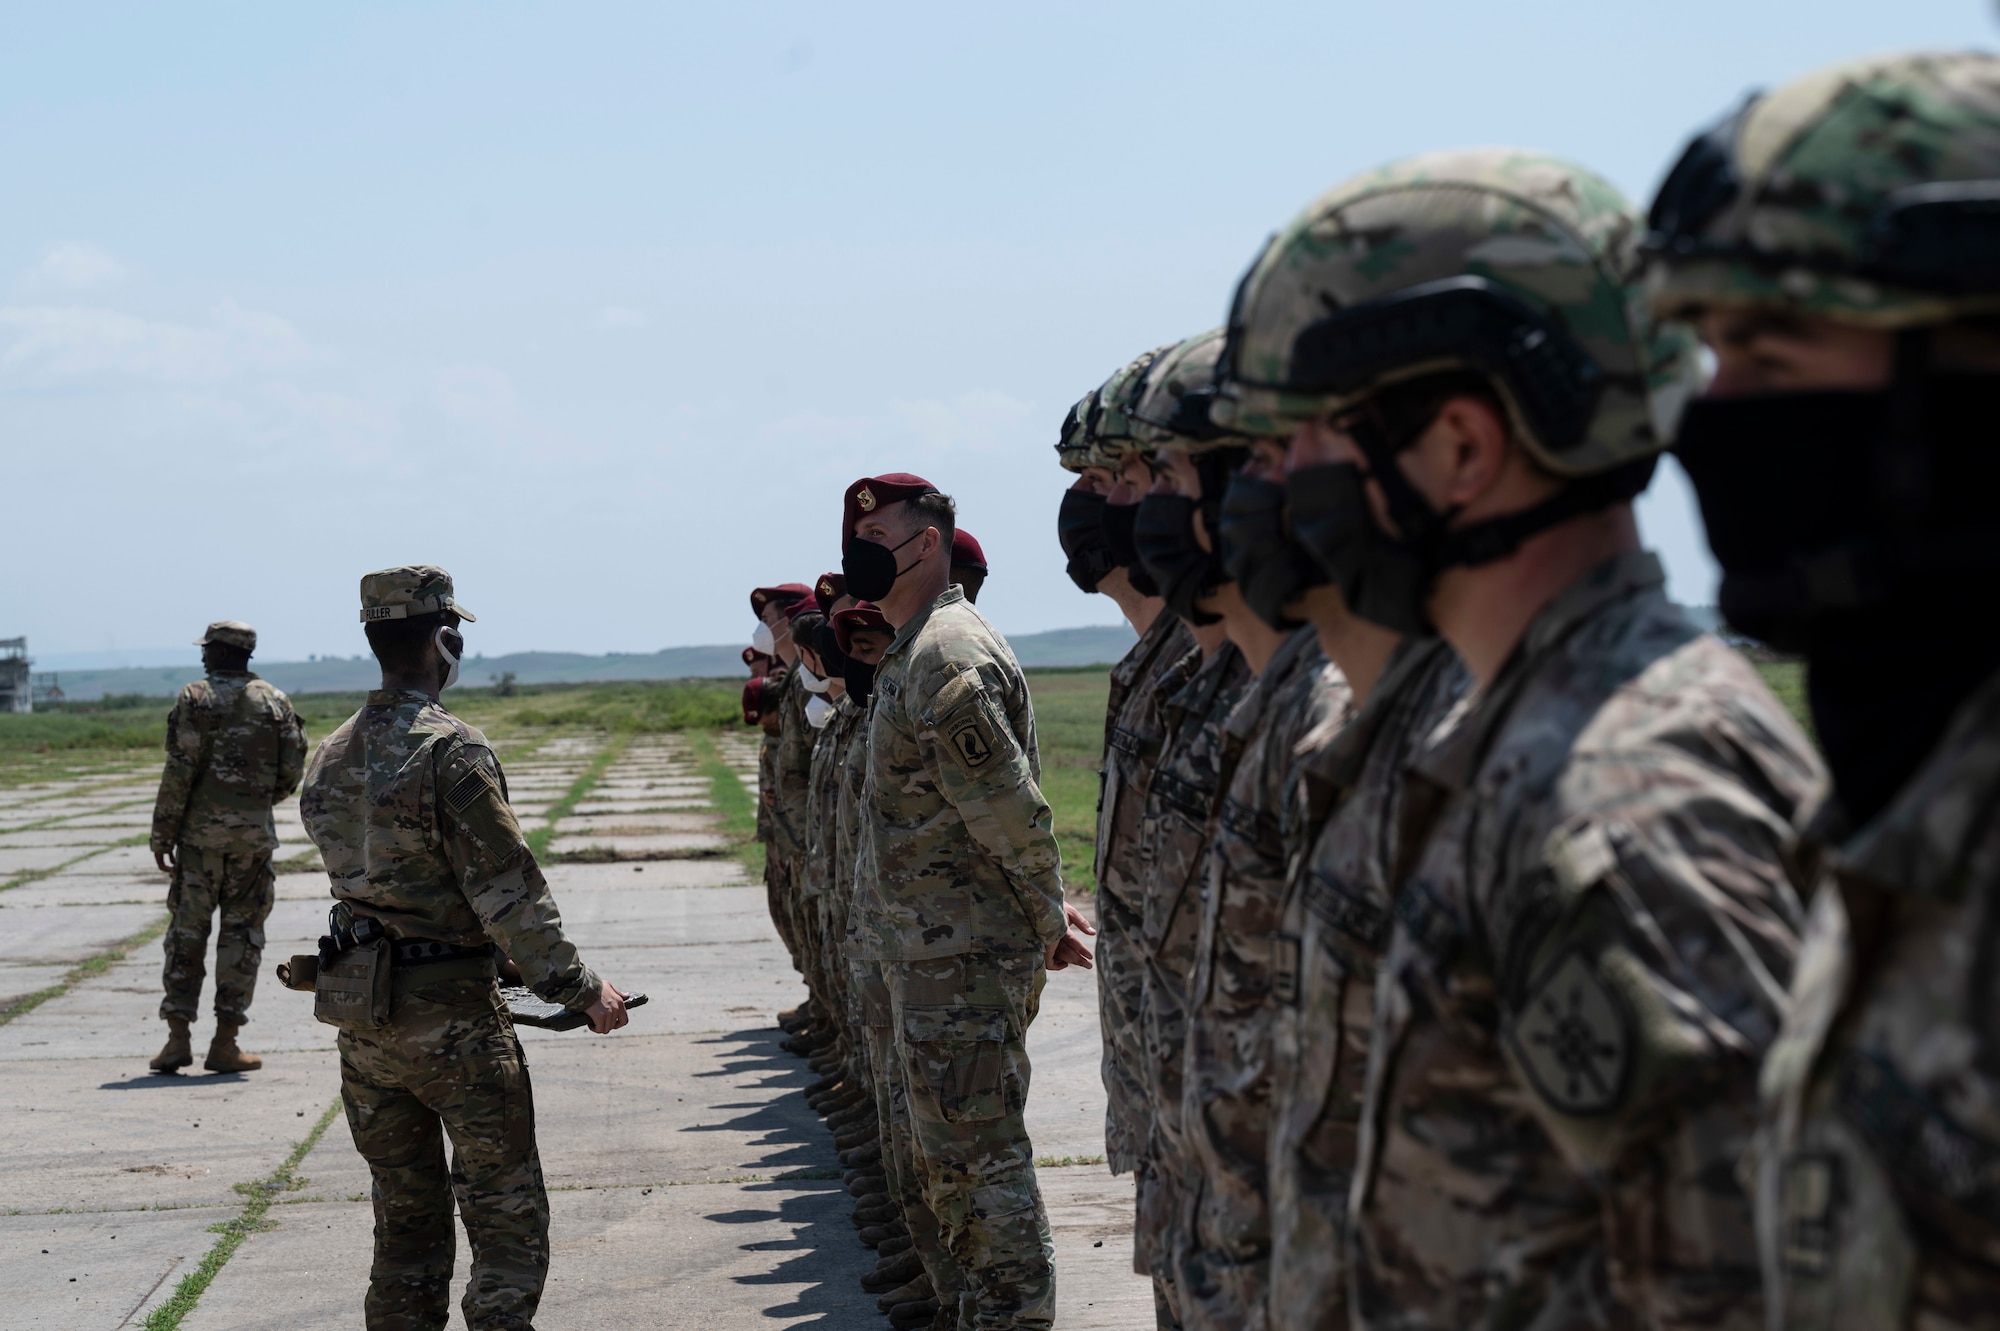 U.S. Army soldiers assigned to the 1st Squadron, 91st Cavalry Regiment, 173rd Infantry Brigade Combat Team (airborne) and Georgian military forces, stand in formation after an airdrop demonstration during exercise Agile Spirit 21